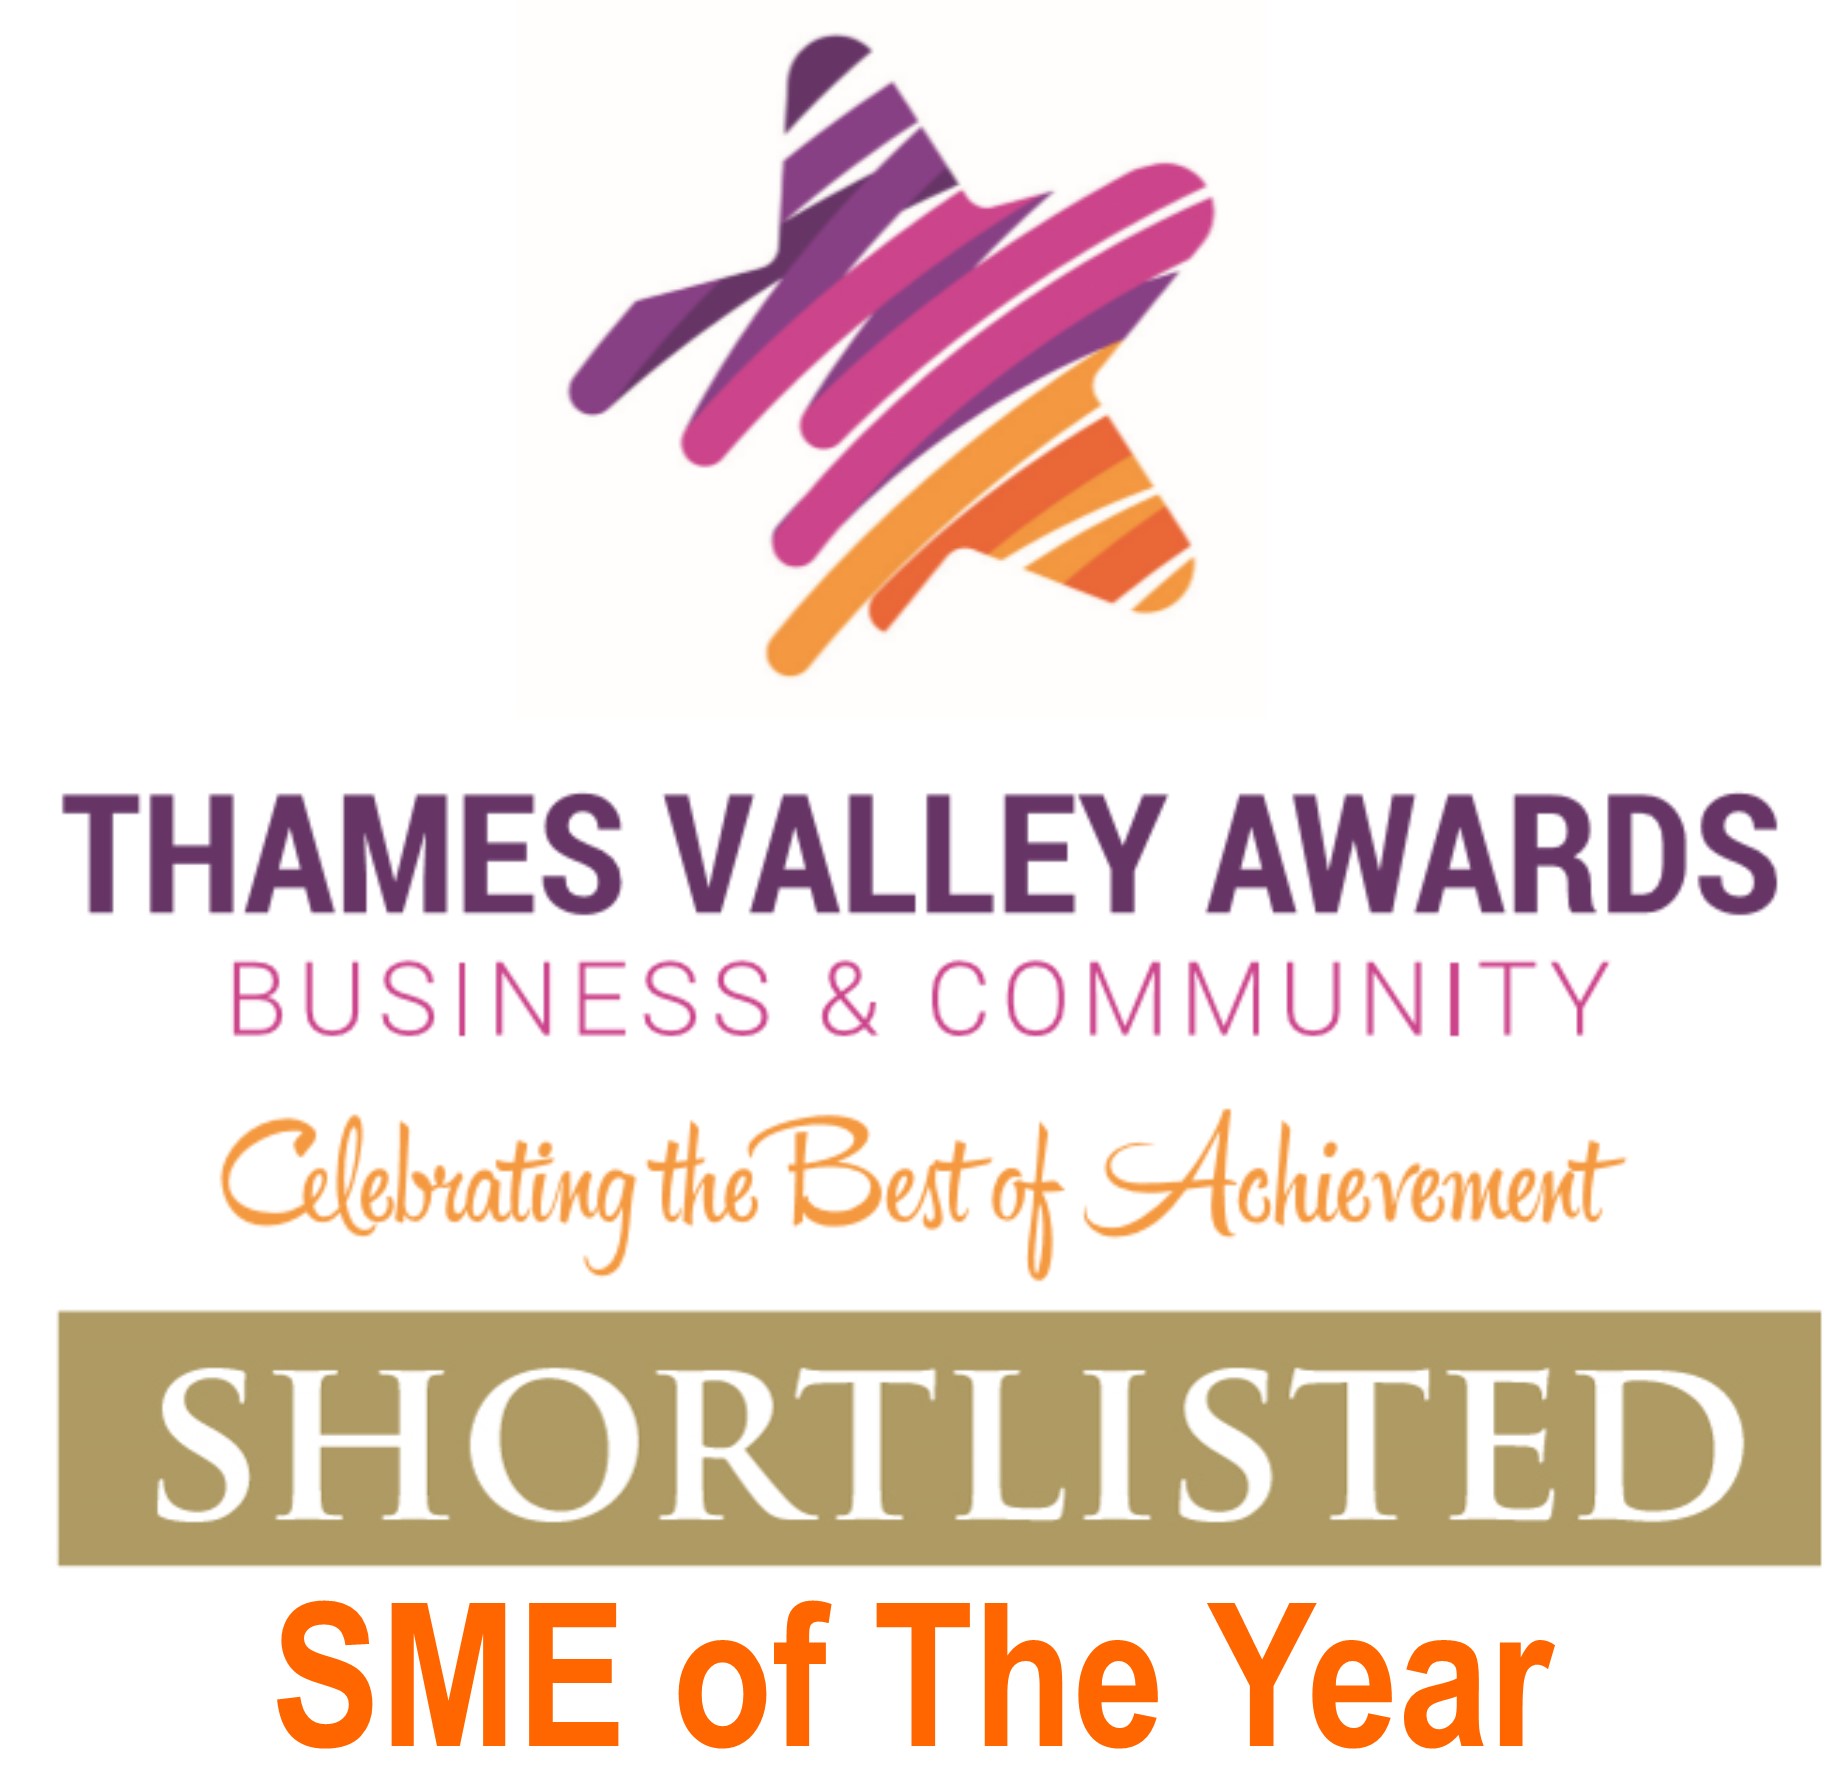 Active shortlisted for Thames Valley Business & Community Awards 2018